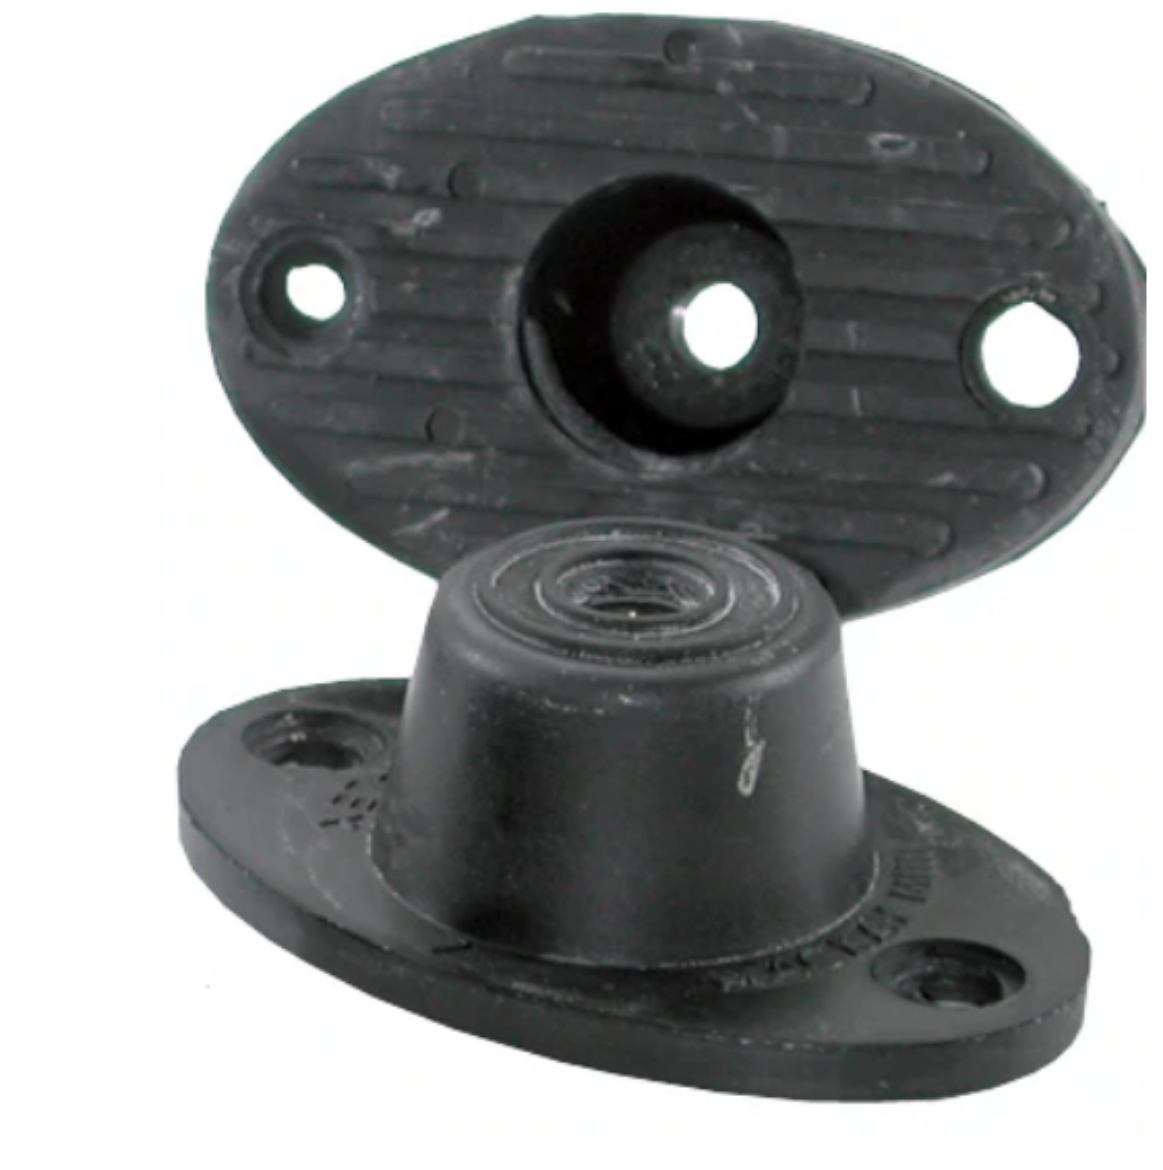 Picture of Conflex Isolator Med 35 DURO 100mmx60mm (Green)(M10)